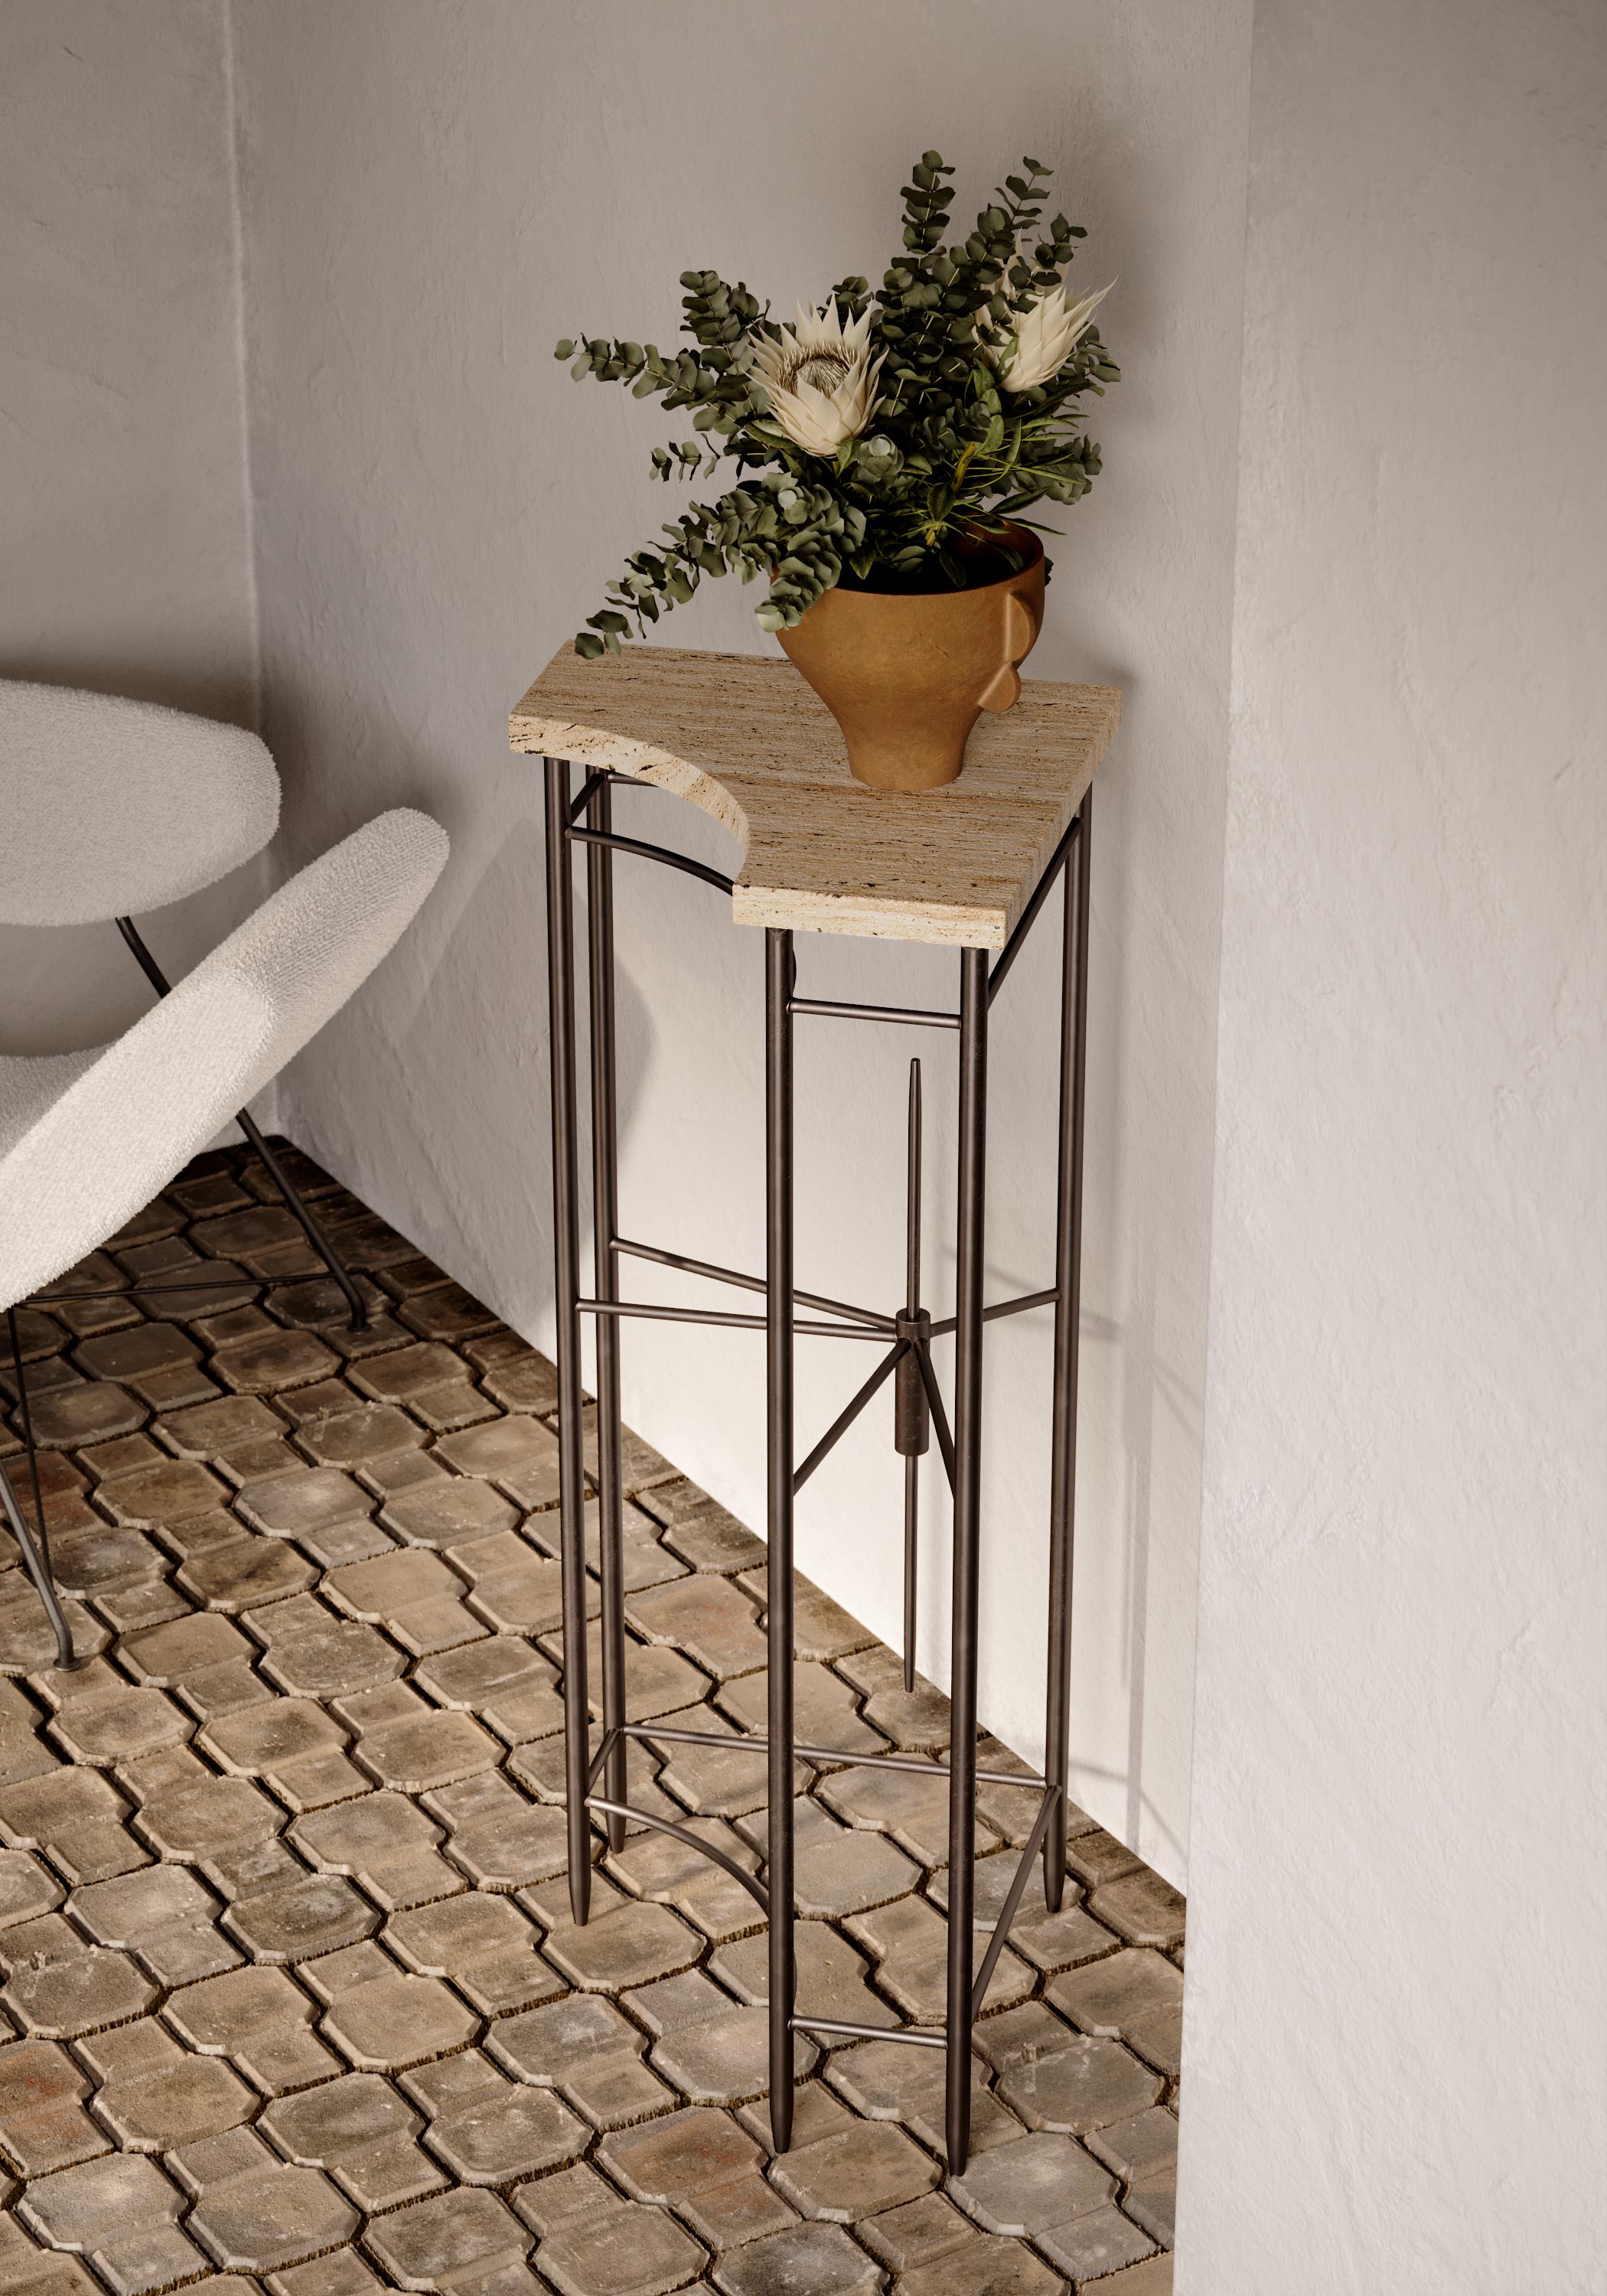 A structural interpretation of space and historic architecture, our contemporary table is skillfully crafted by organic materials, a sand-colored marble top that is geometrically shaped by a crescent moon and thoughtfully placed on steel legs. The